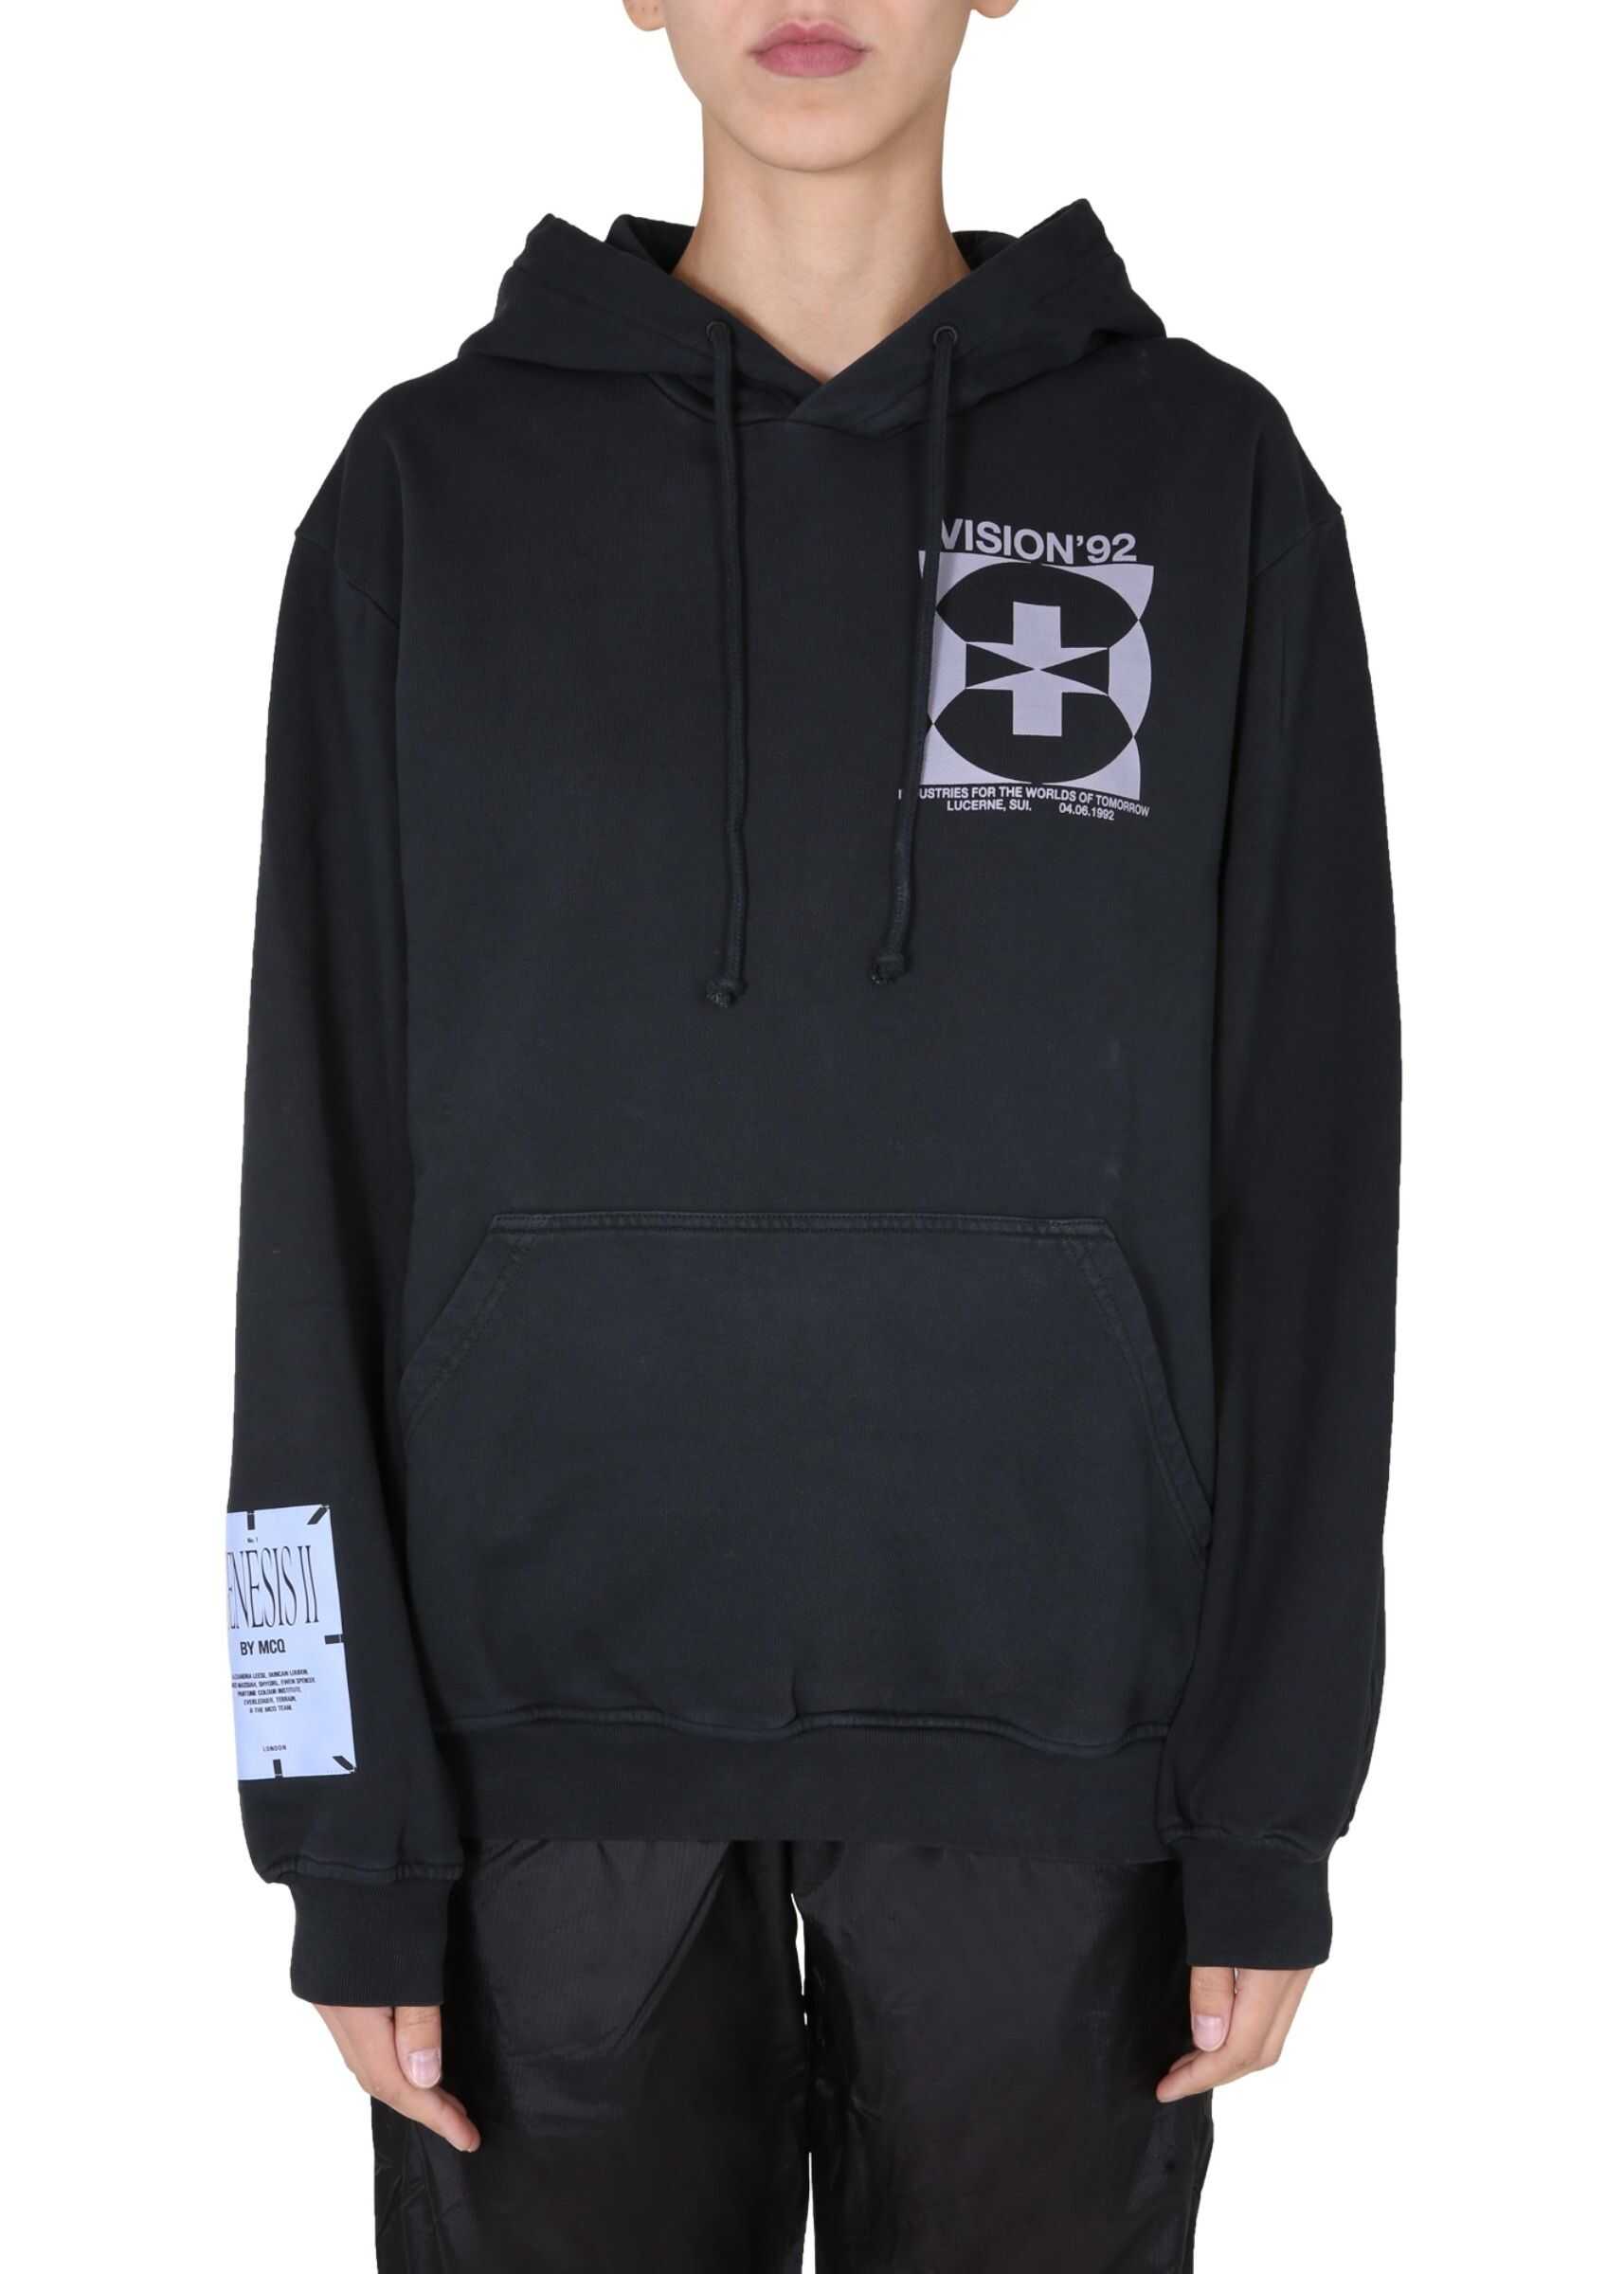 McQ Relaxed Fit Sweatshirt BLACK image9